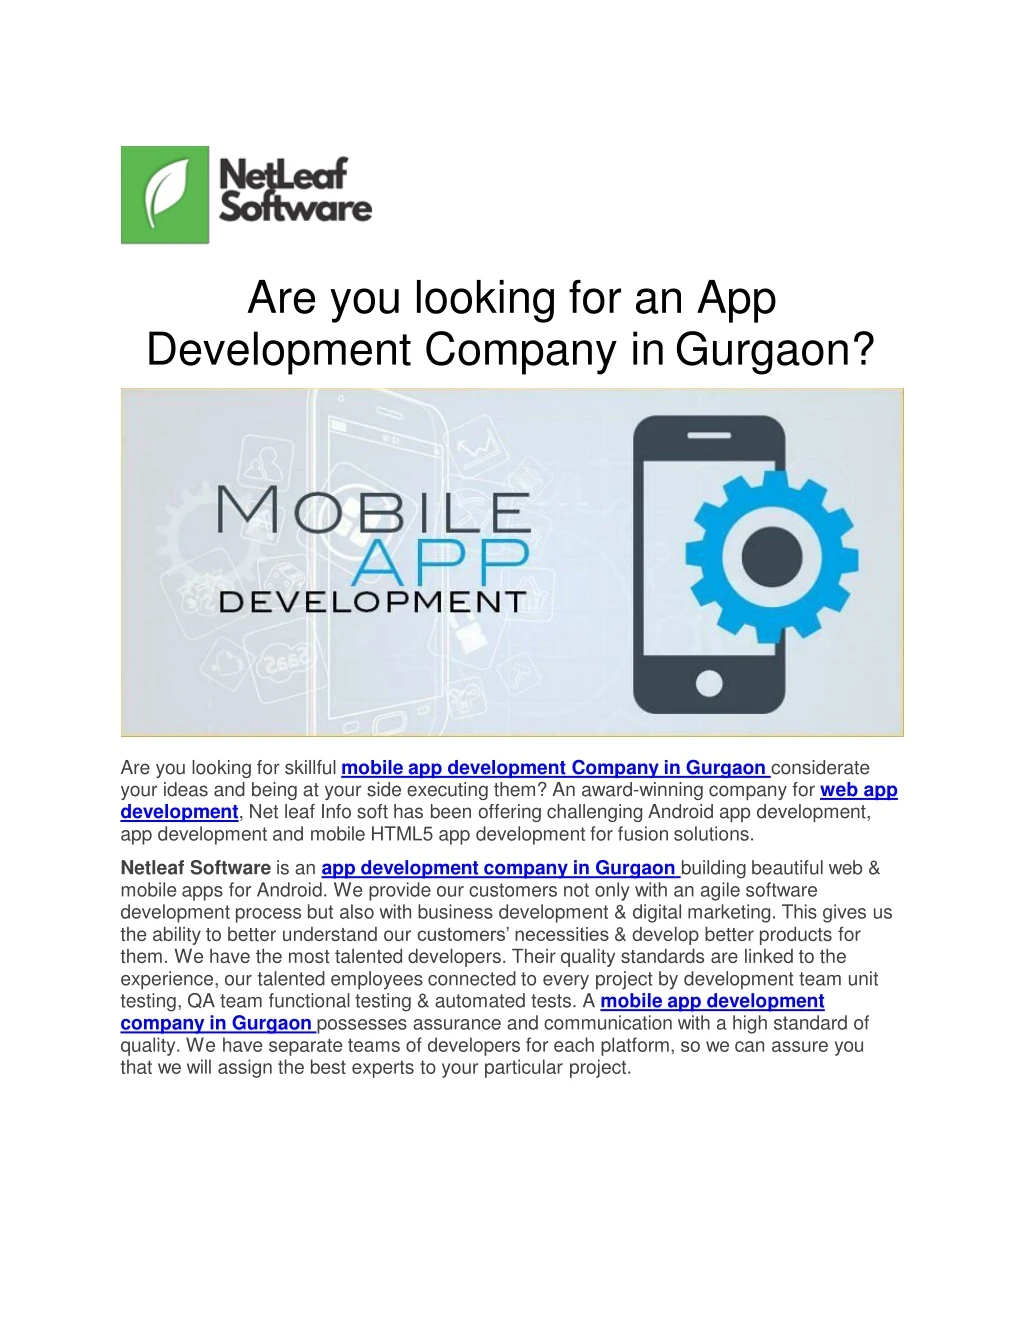 are you looking for an app development company in gurgaon